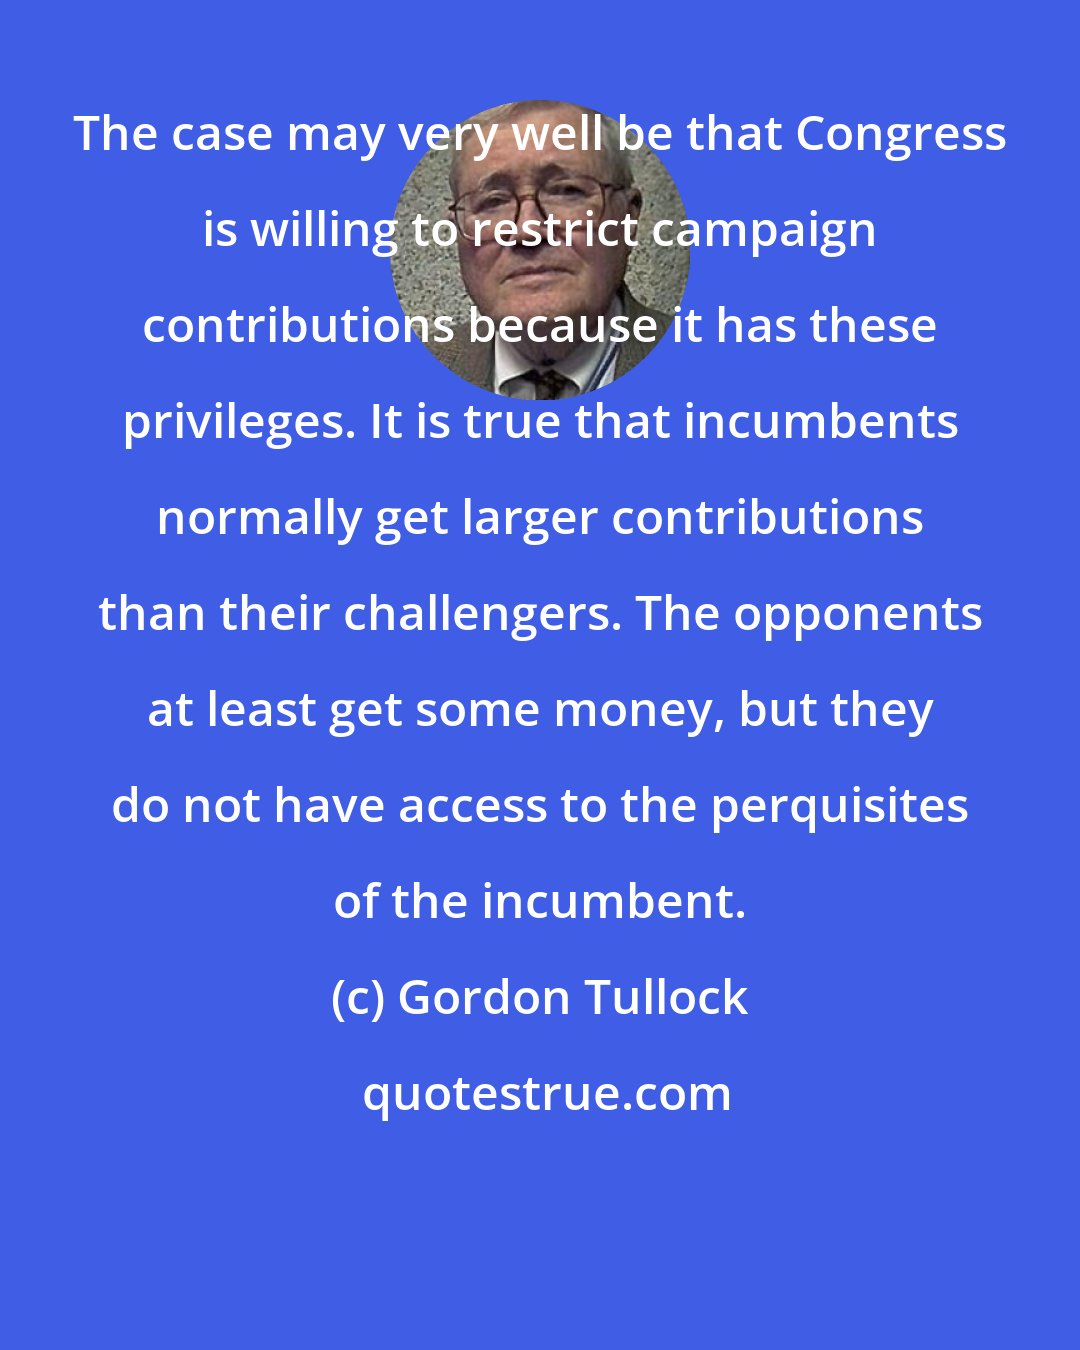 Gordon Tullock: The case may very well be that Congress is willing to restrict campaign contributions because it has these privileges. It is true that incumbents normally get larger contributions than their challengers. The opponents at least get some money, but they do not have access to the perquisites of the incumbent.